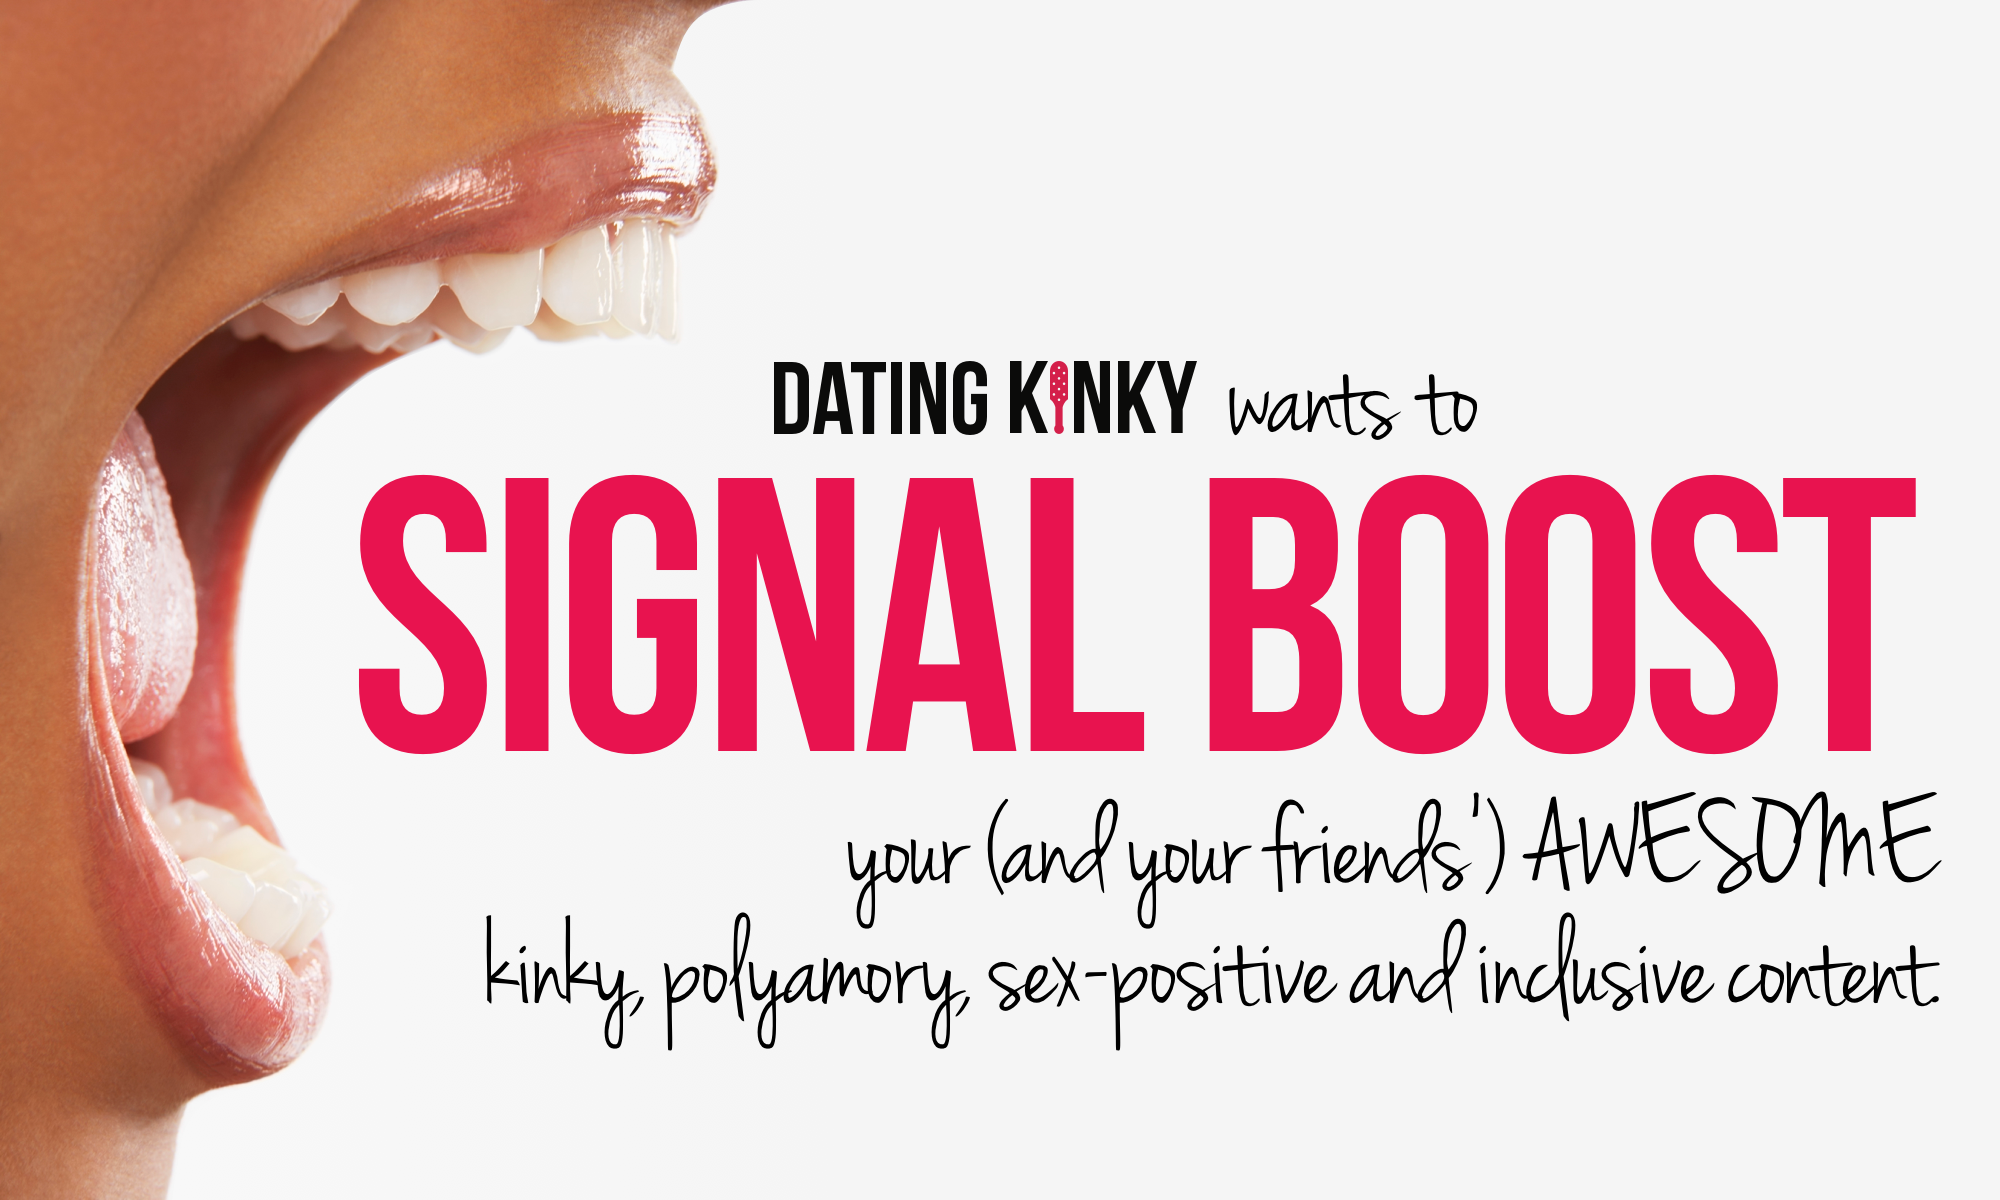 Can Dating Kinky Signal Boost You?